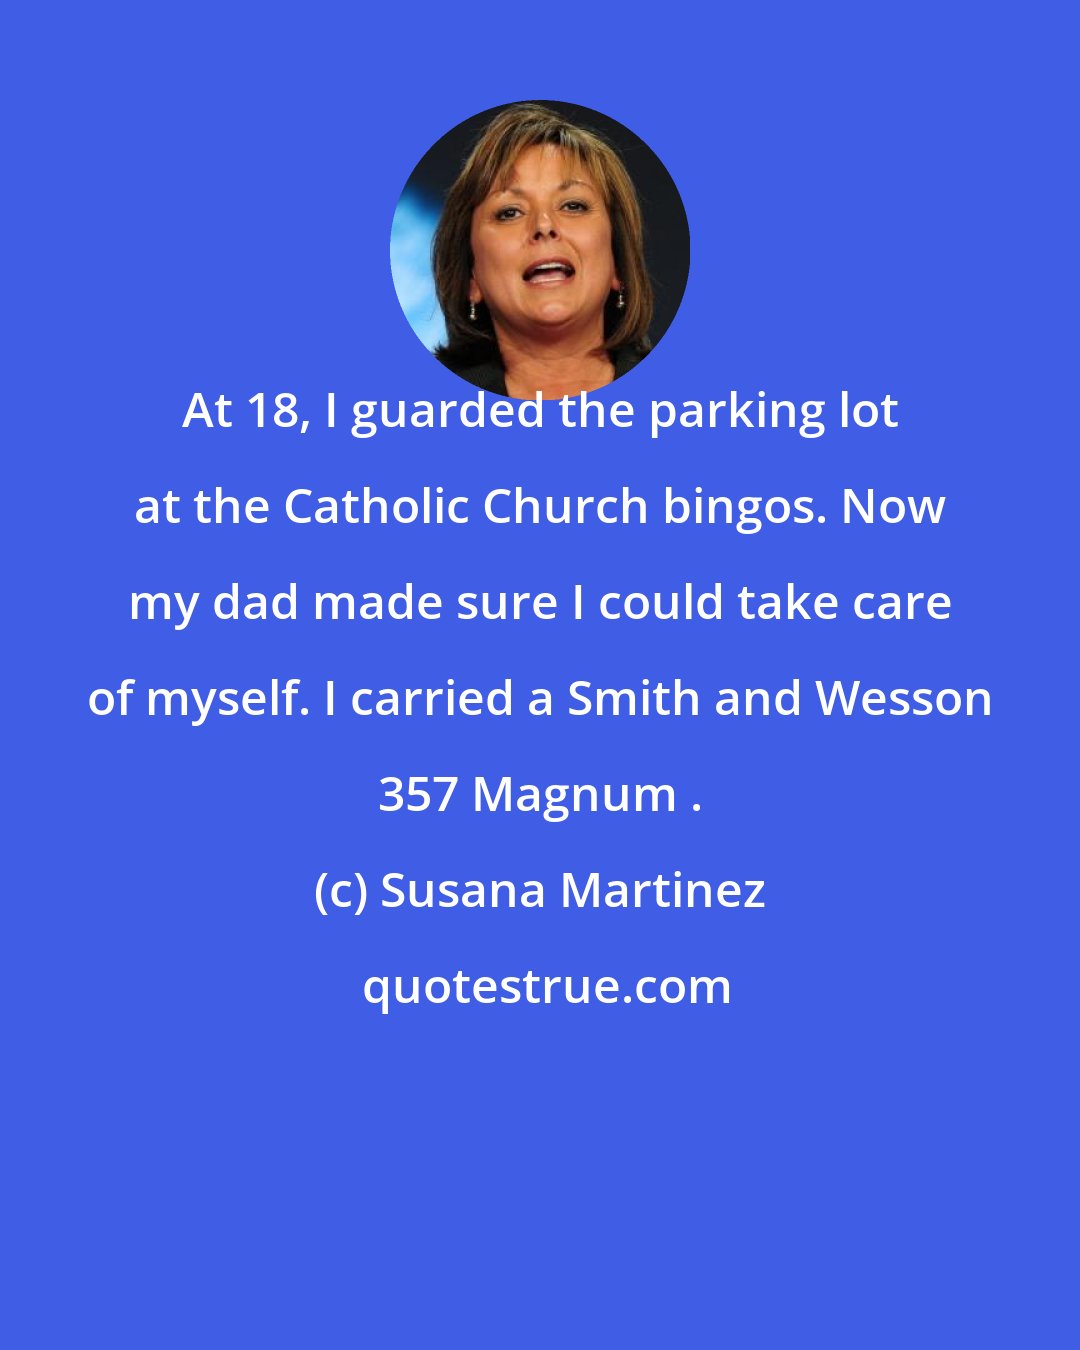 Susana Martinez: At 18, I guarded the parking lot at the Catholic Church bingos. Now my dad made sure I could take care of myself. I carried a Smith and Wesson 357 Magnum .